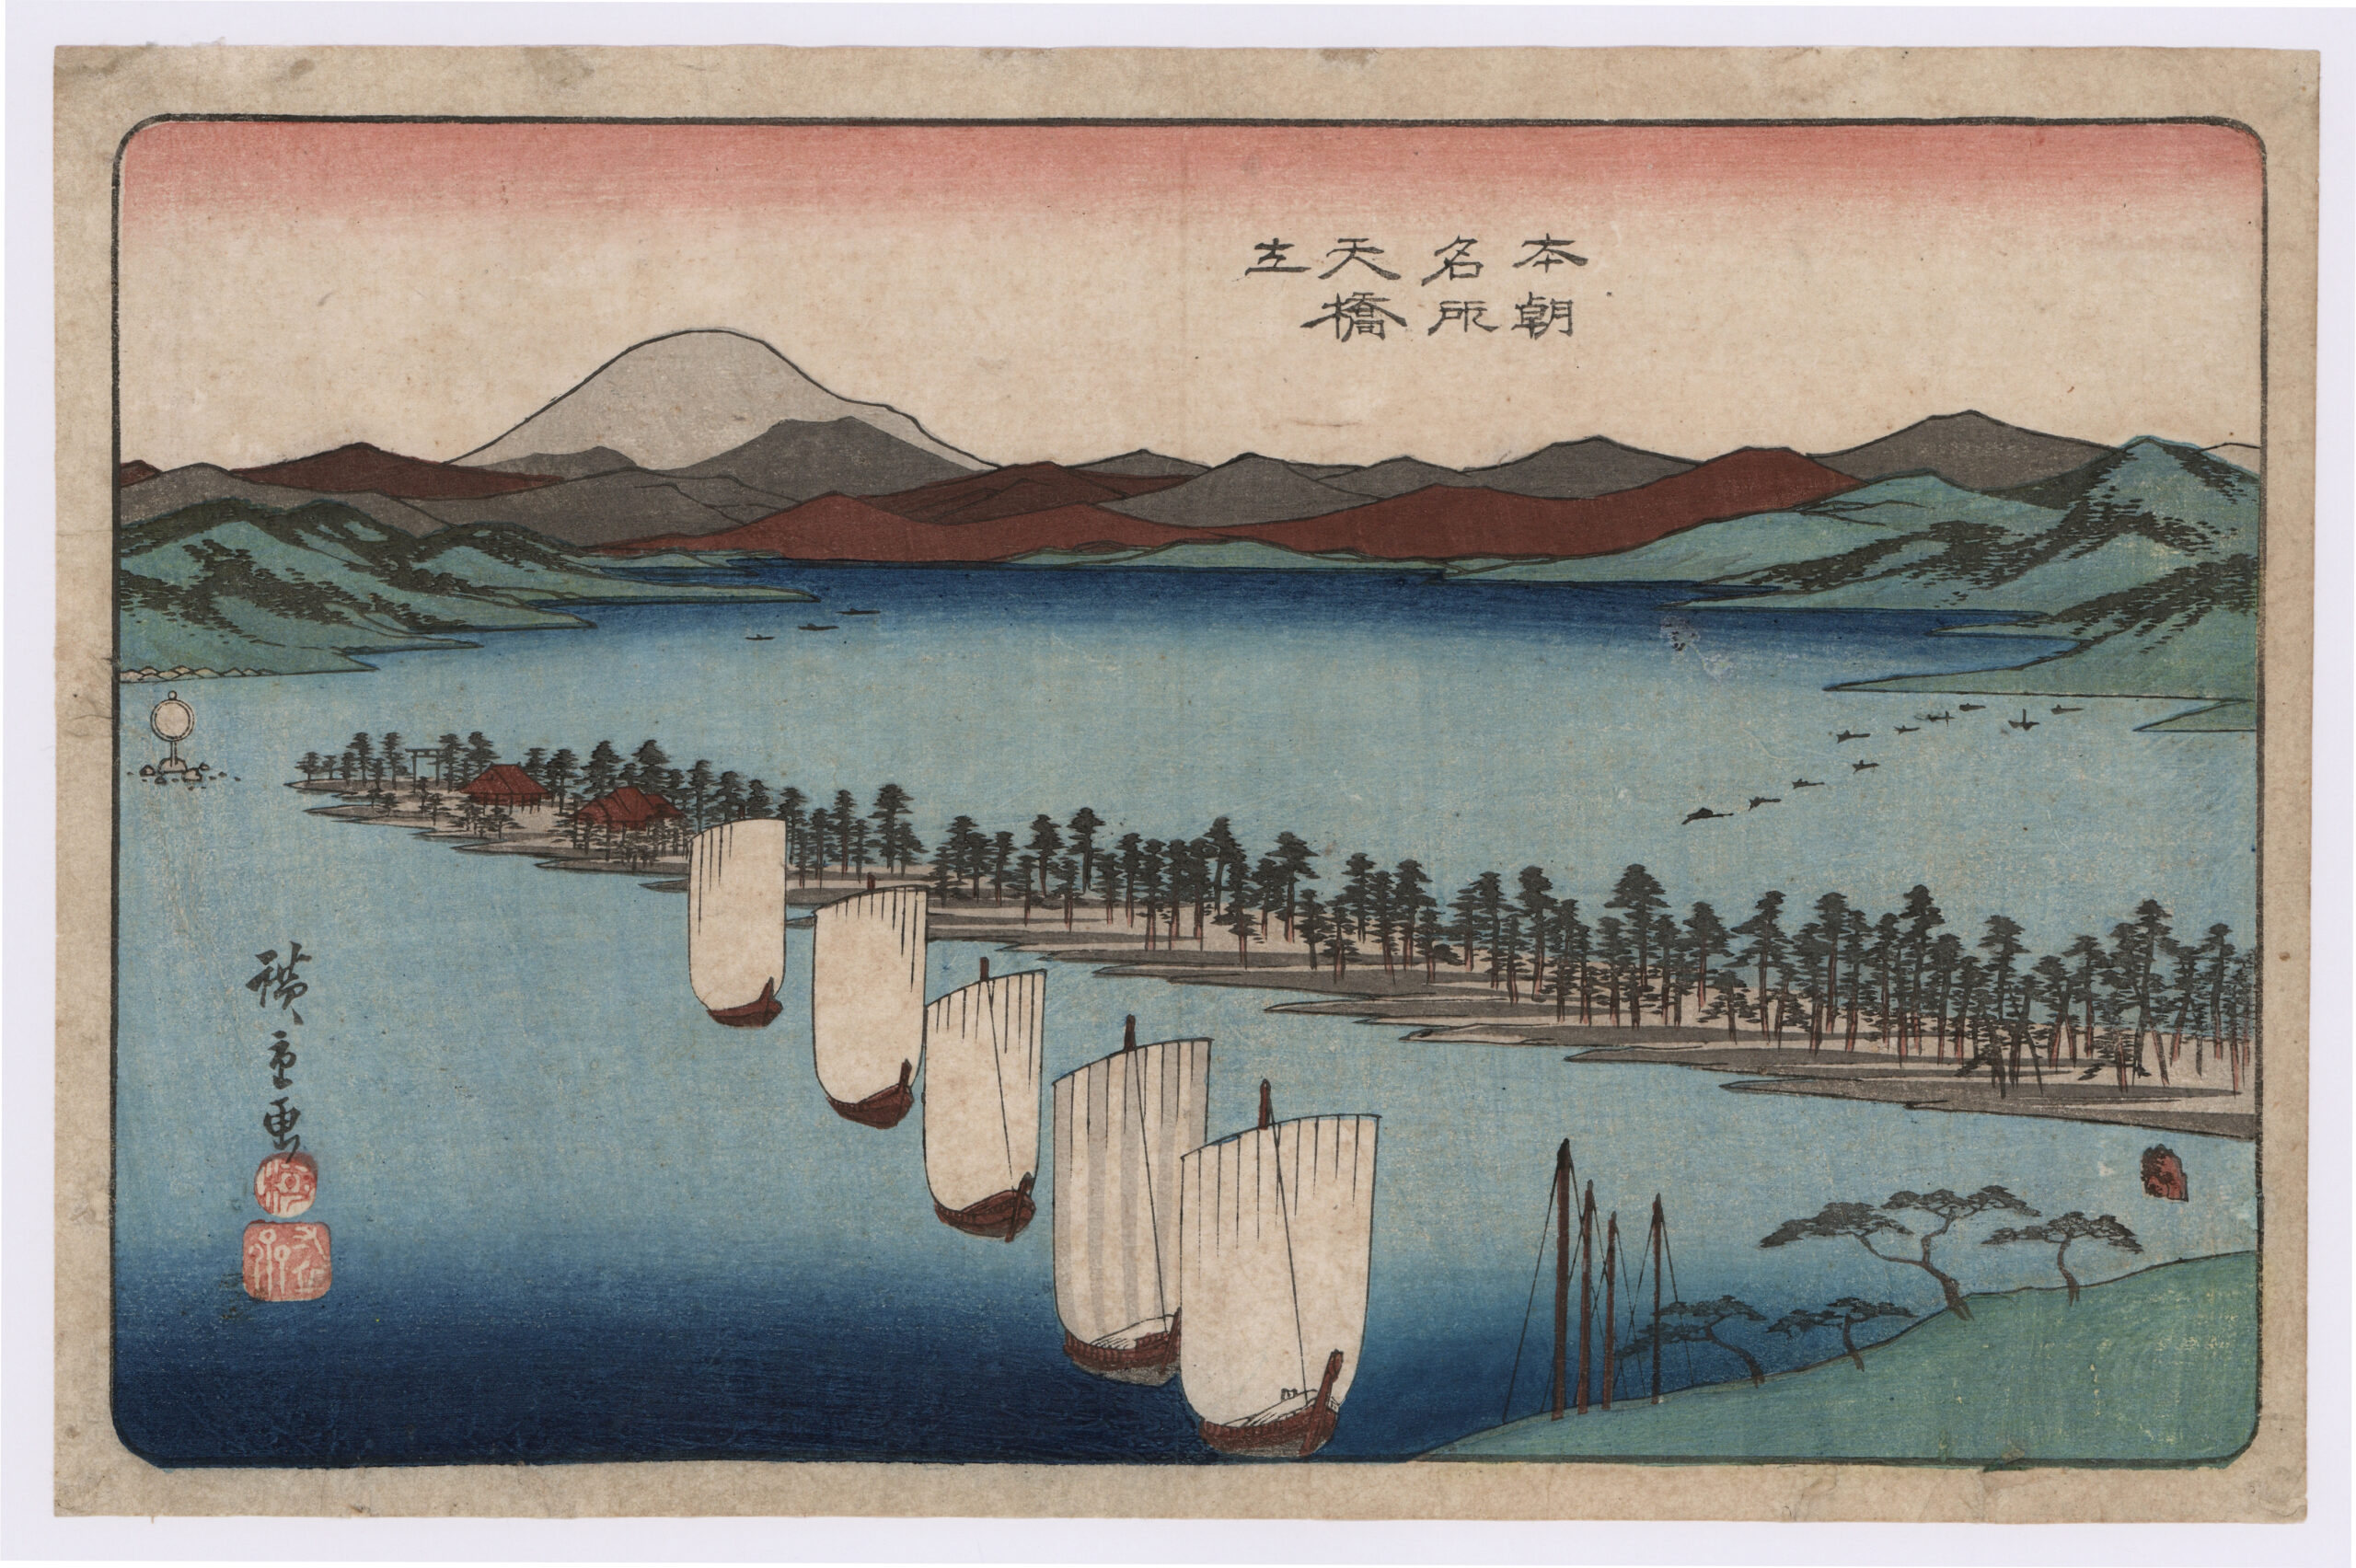 Utagawa Hiroshige (1797-1858), 'Ama no Hashidate', from the series 'Famous Places of our Country', woodblock print, circa 1837, 23.6 x 36 cm.